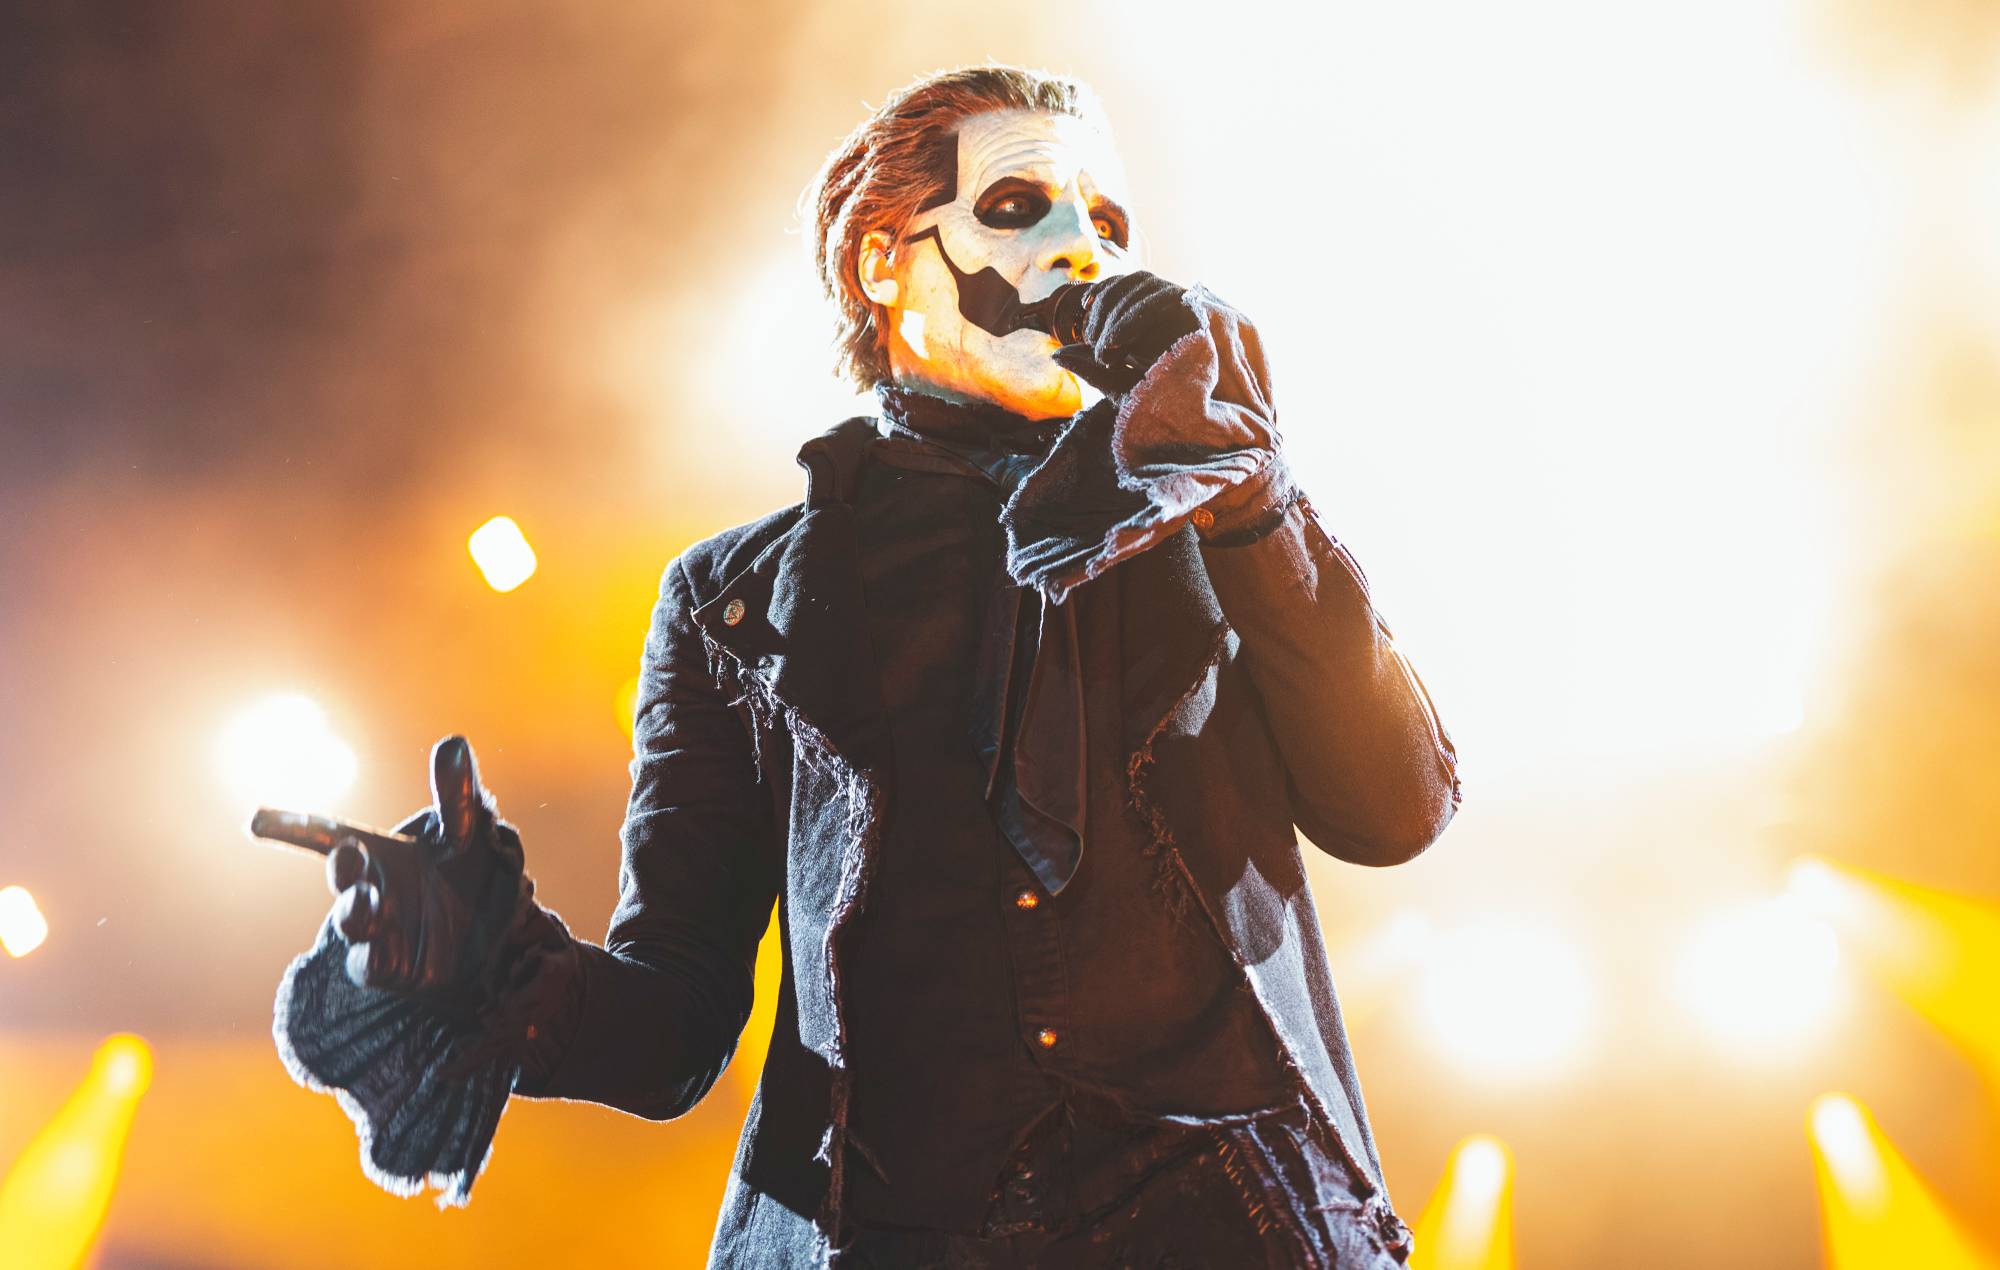 Tobias Forge of the Swedish rock band Ghost performs in concert during Resurrection Fest 2023 on June 28, 2023 in Viveiro, Spain. (Photo by Mariano Regidor/Redferns)